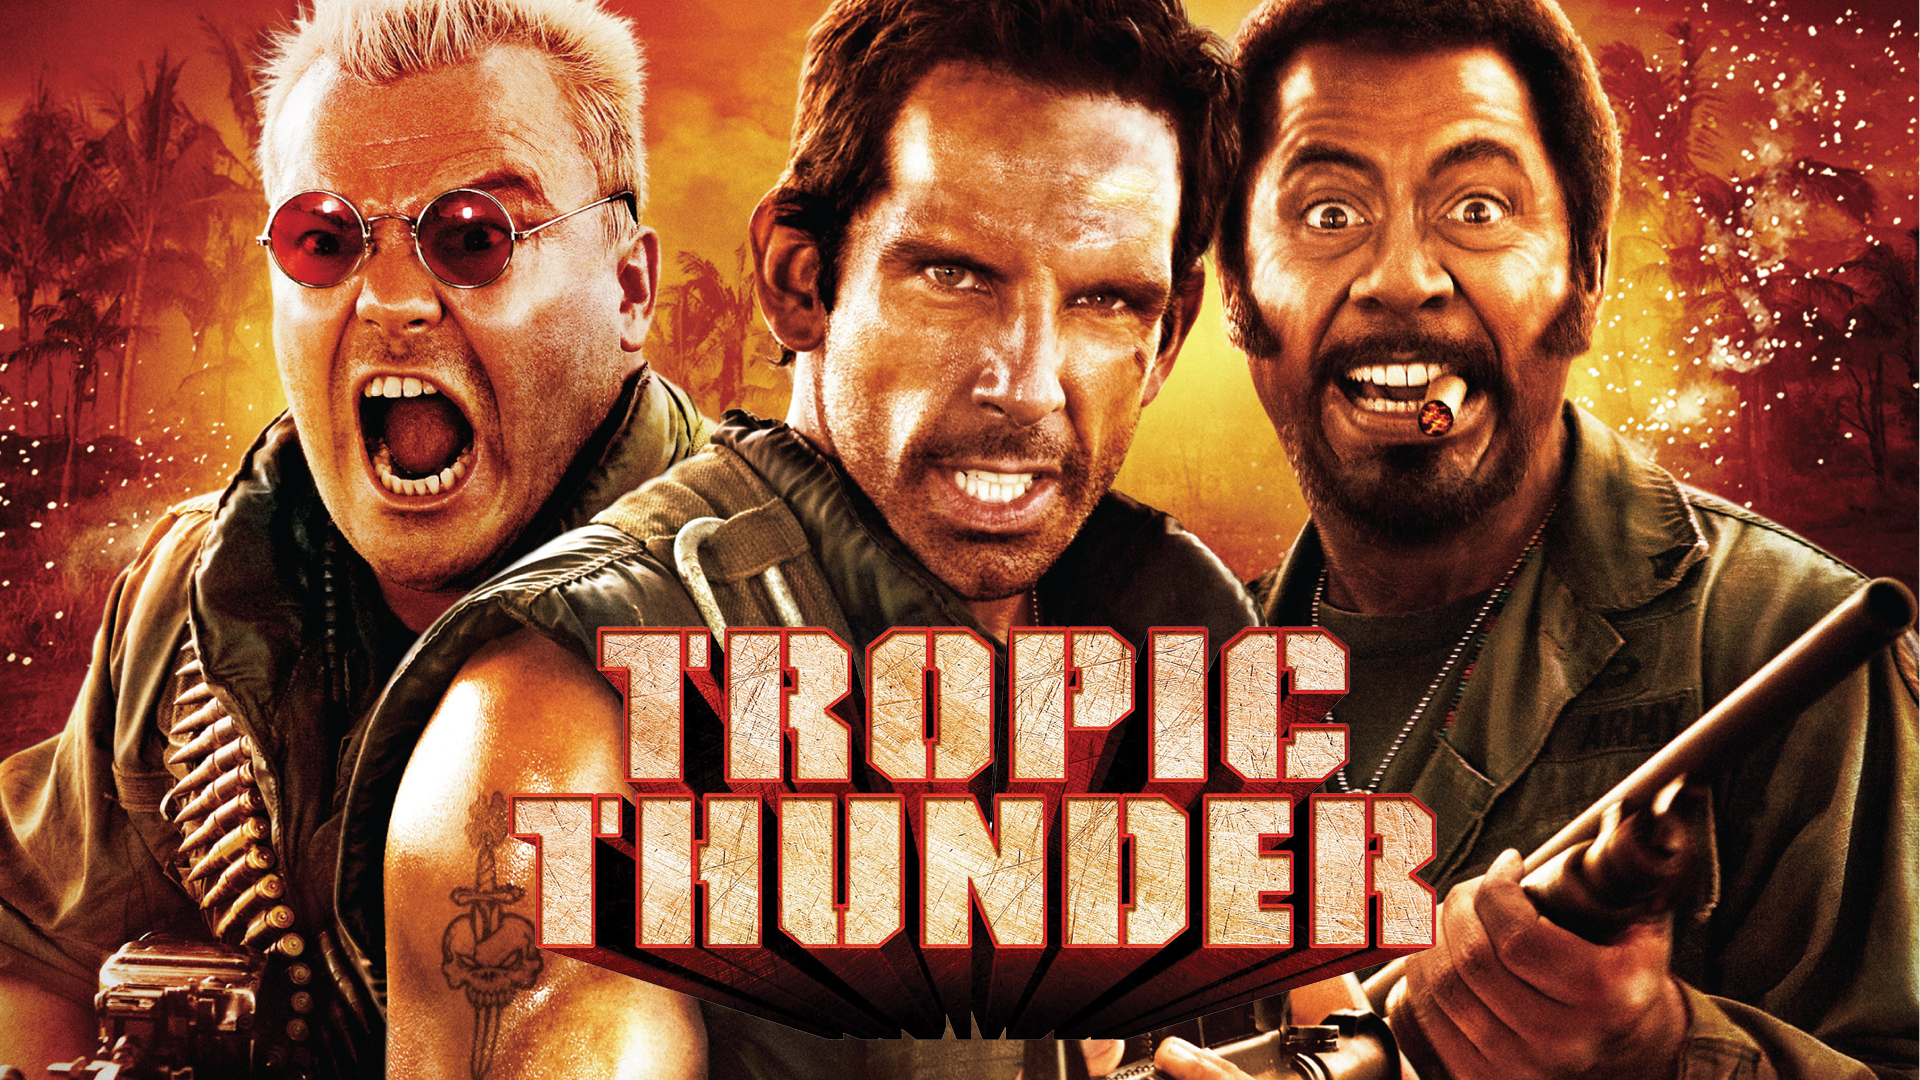 tropic, Thunder, Action, Comedy, Military, Weapon,  52 Wallpaper